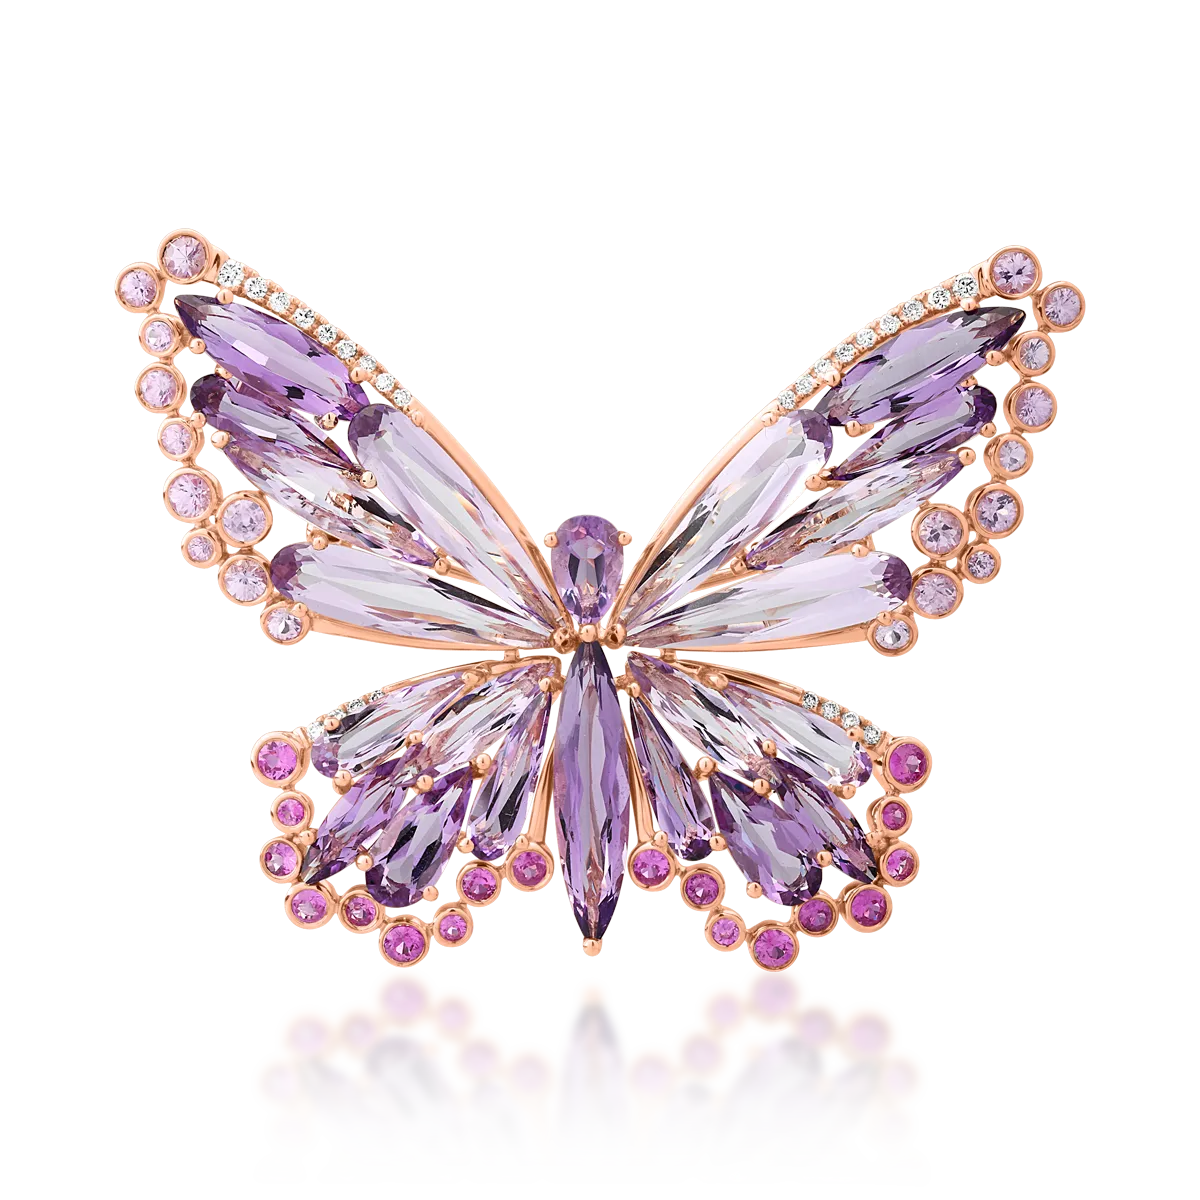 18K rose gold brooch with 13ct pink amethyst